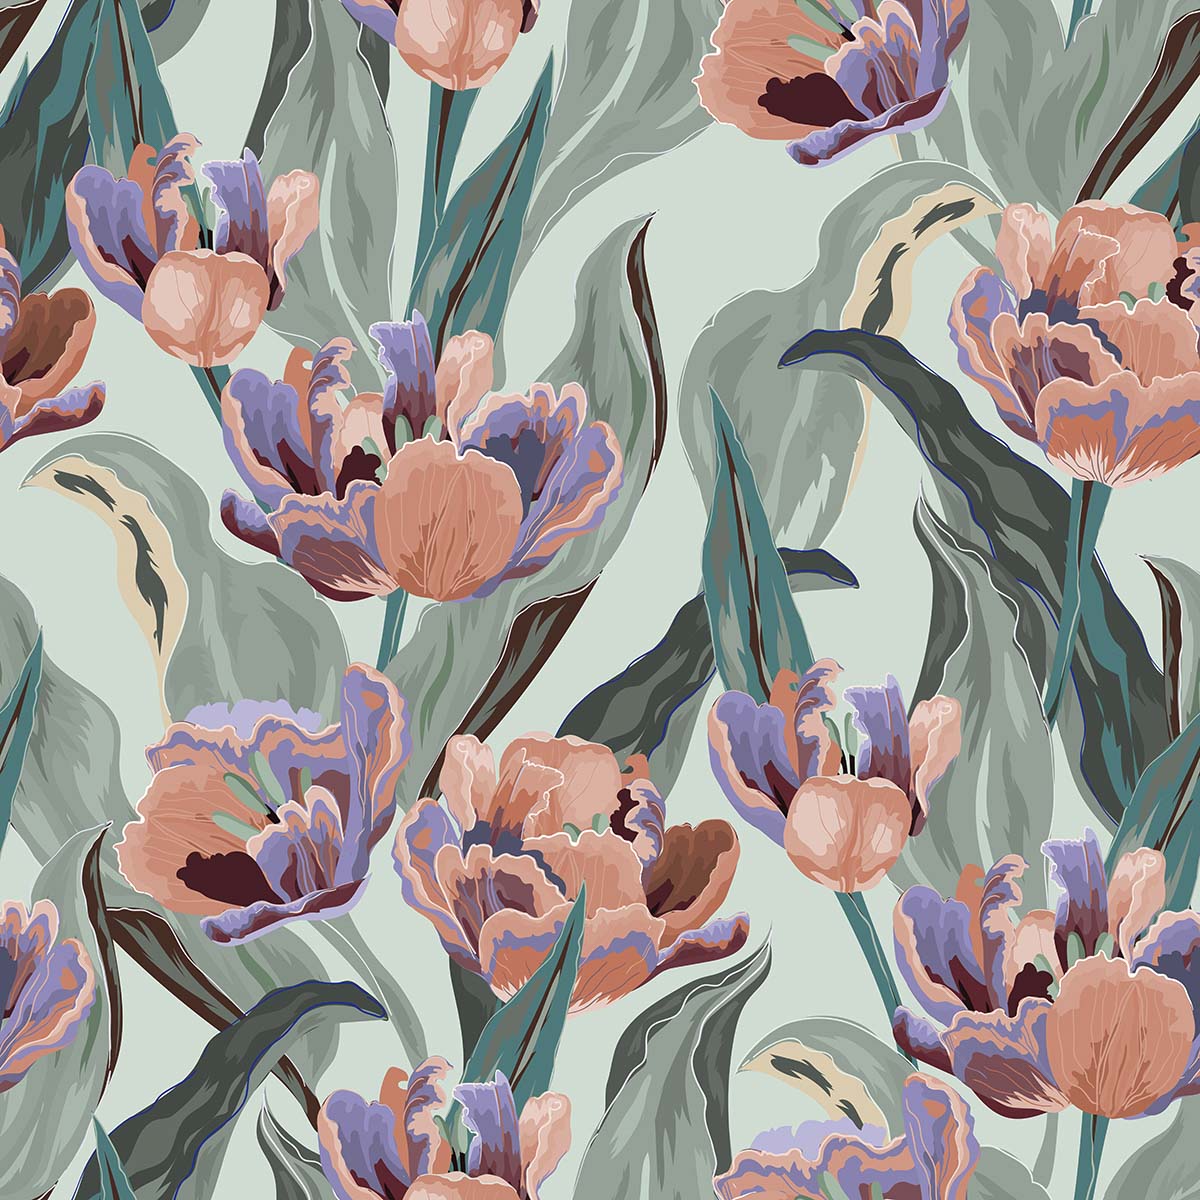 A floral pattern with flowers and leaves